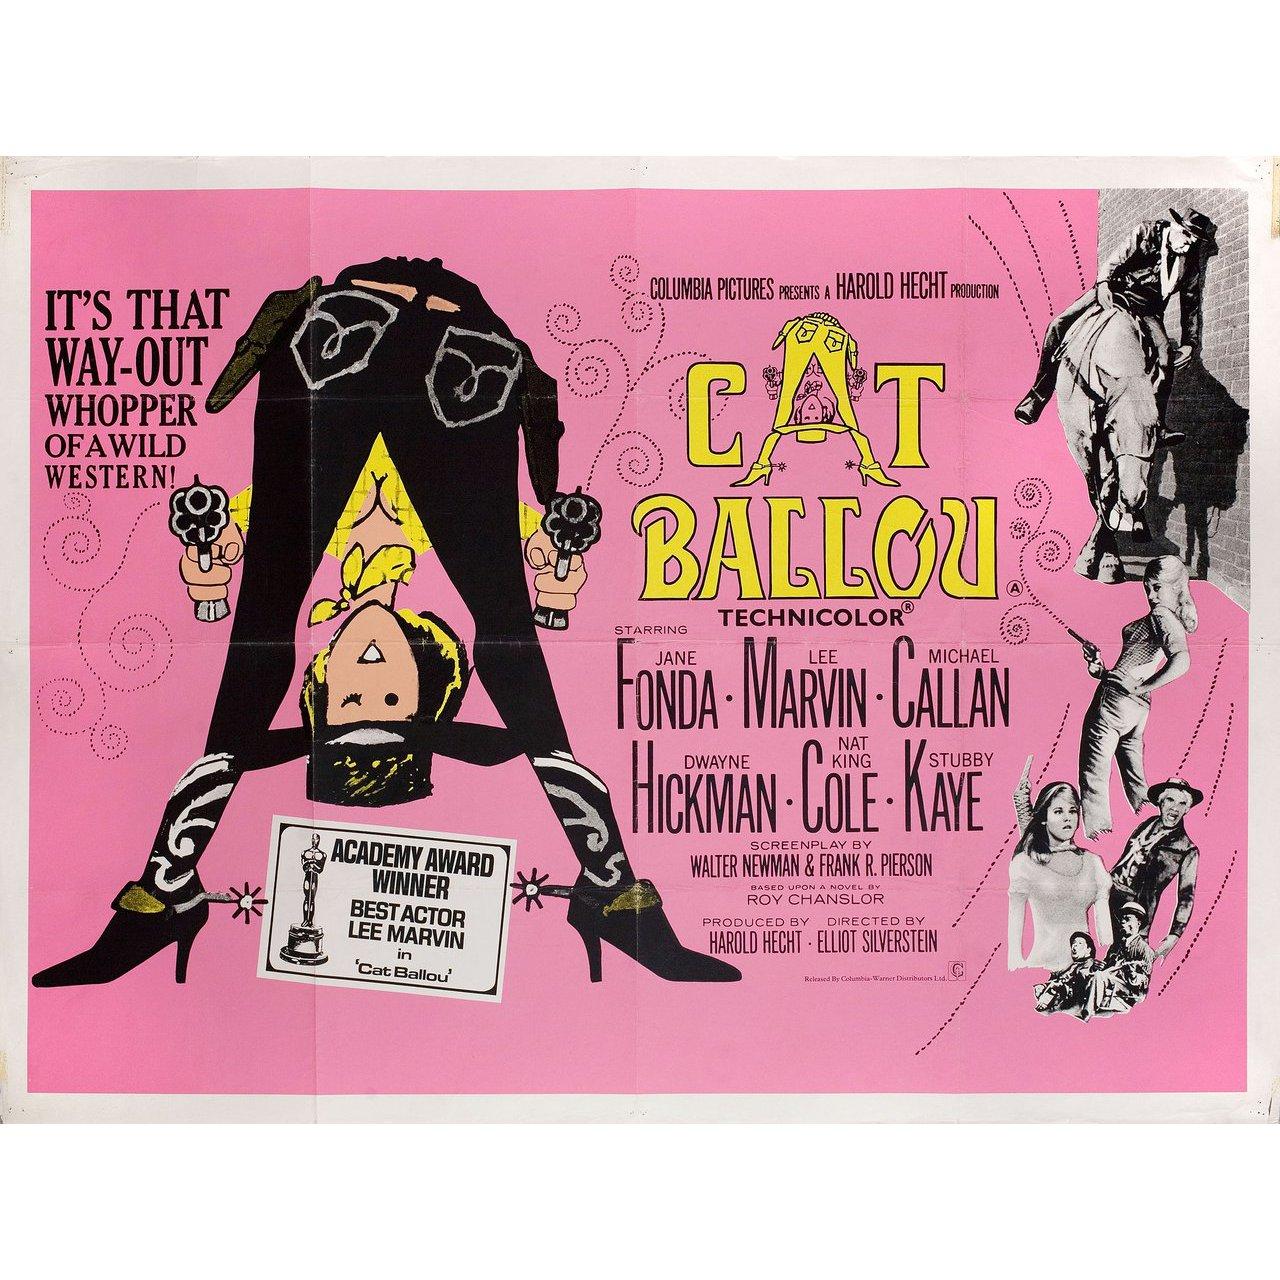 Original 1960s re-release British quad poster for the film Cat Ballou directed by Elliot Silverstein with Jane Fonda / Lee Marvin / Michael Callan / Dwayne Hickman. Very good condition, folded. Many original posters were issued folded or were